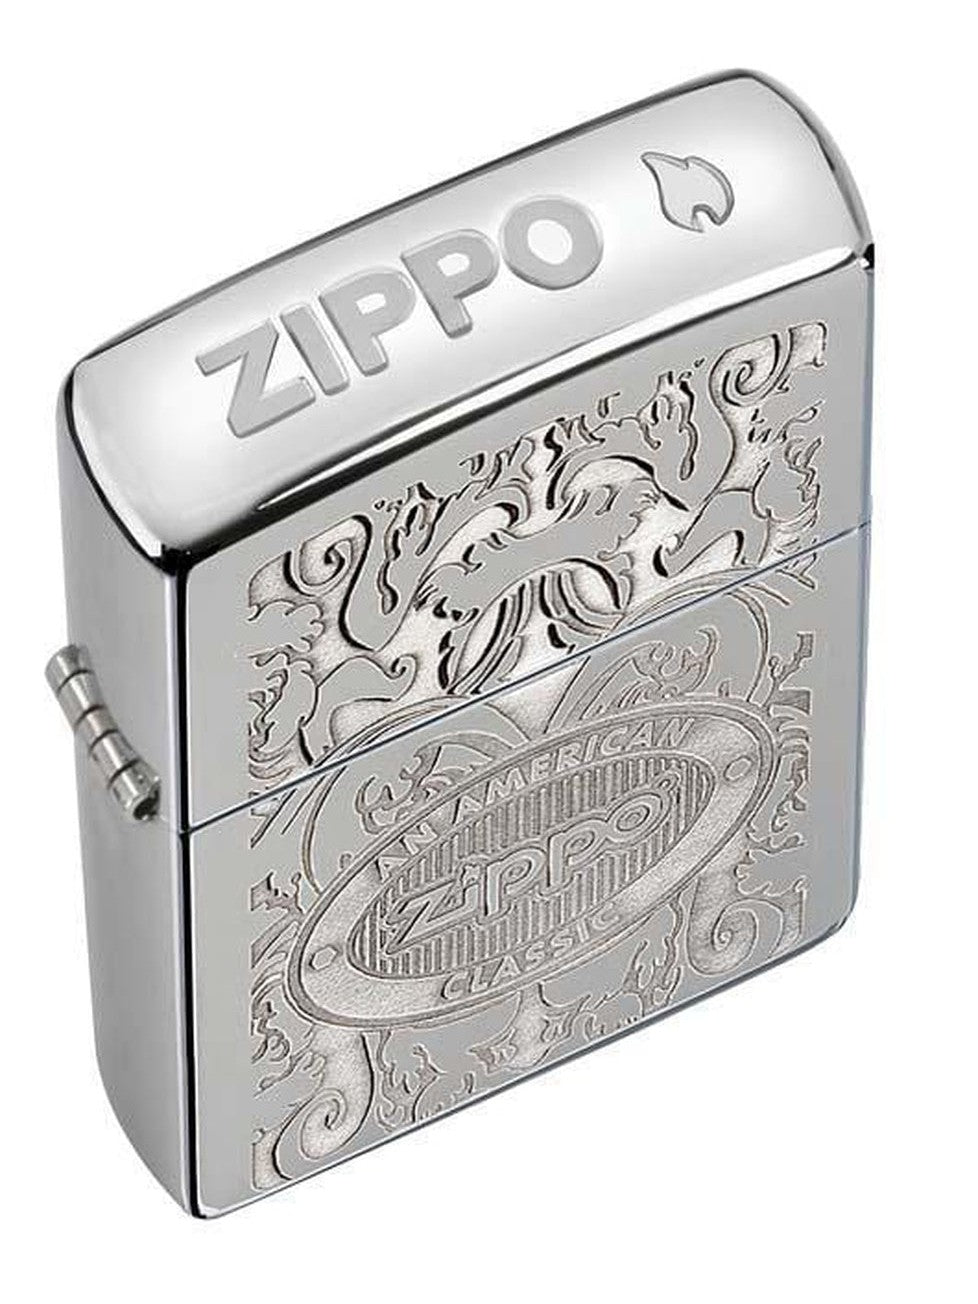 Zippo Pipe Lighter: American Classic, Crown Stamp - High Polish Chrome 24751PL (1975637999731)